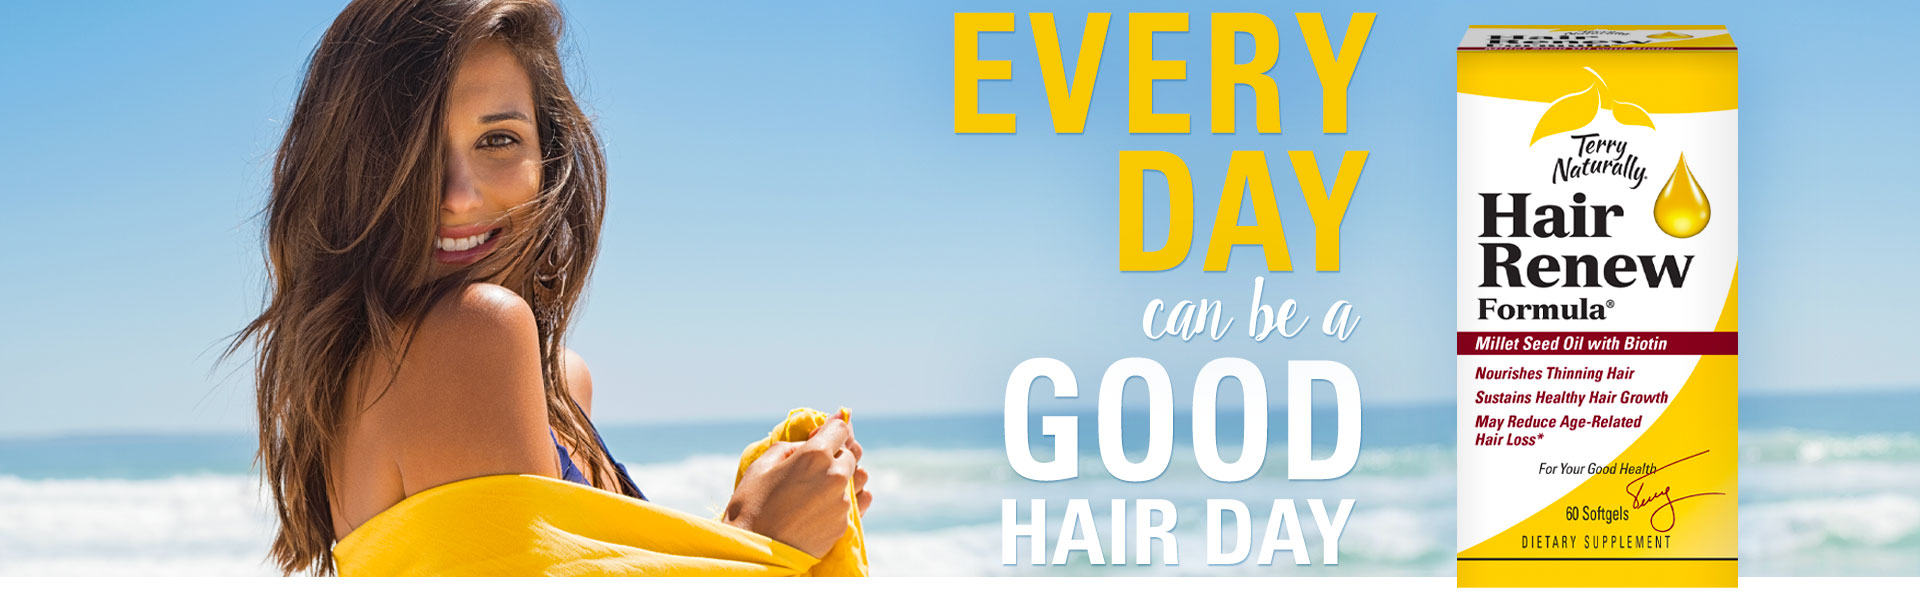 EVERY DAY can be a GOOD HAIR DAY with HAIR RENEW FORMULA